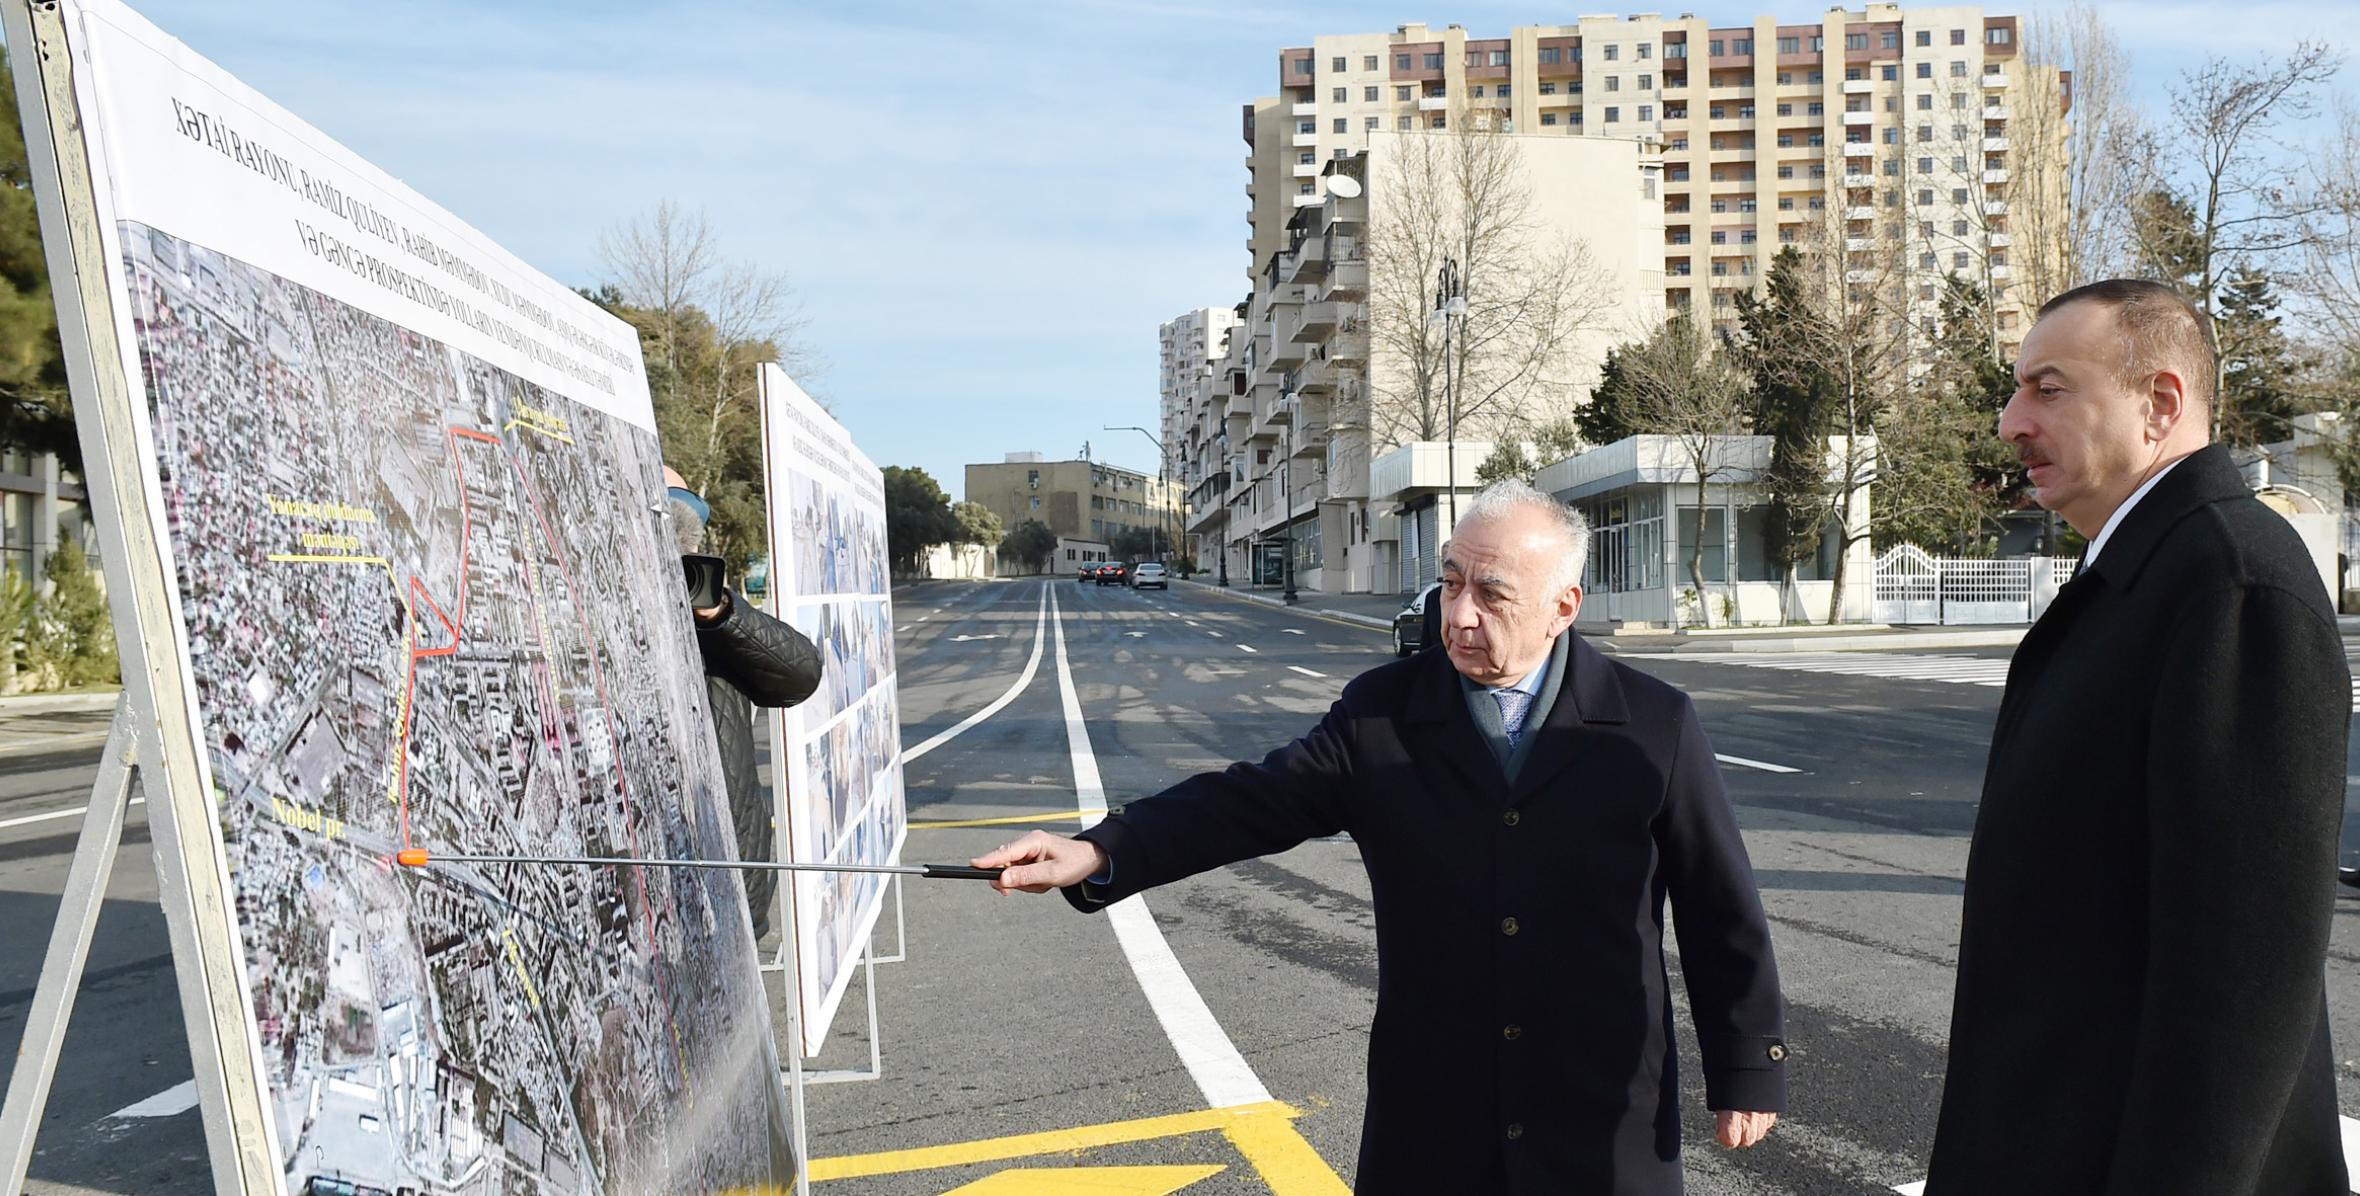 Ilham Aliyev reviewed roads in Khatai district after reconstruction